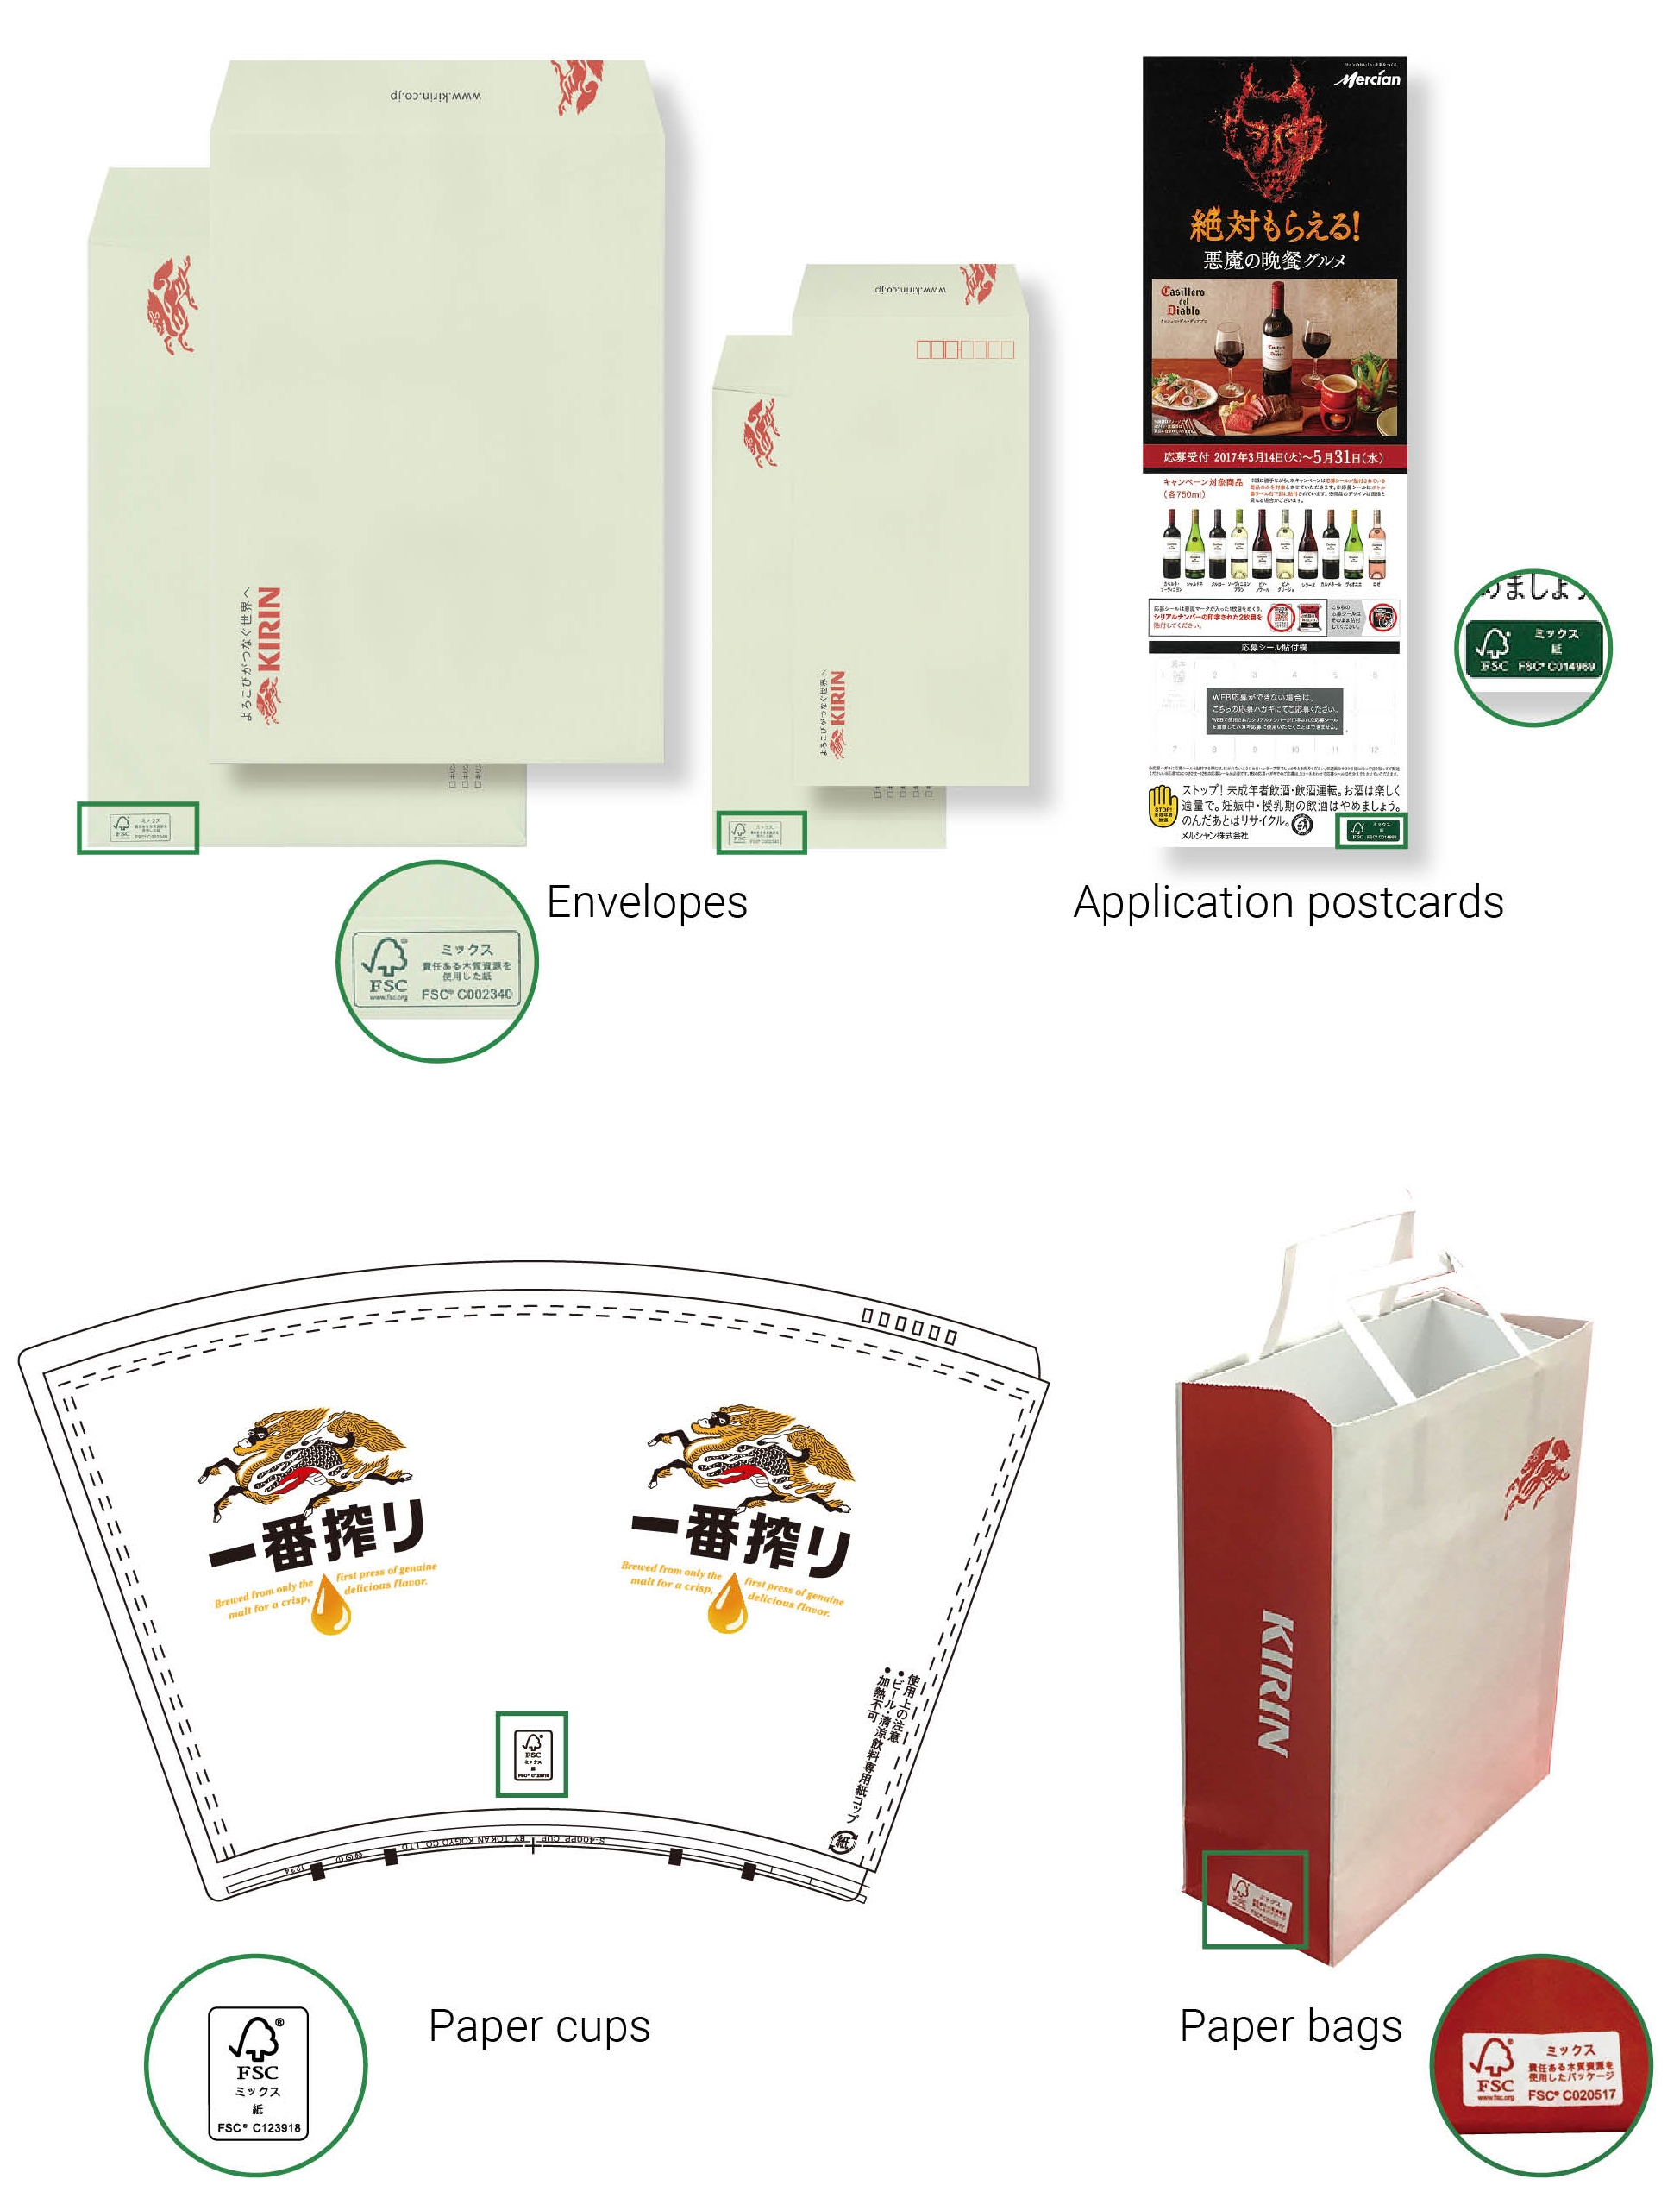 Image: EnveIopes,RepIy postcards,Paper cups,peper bags